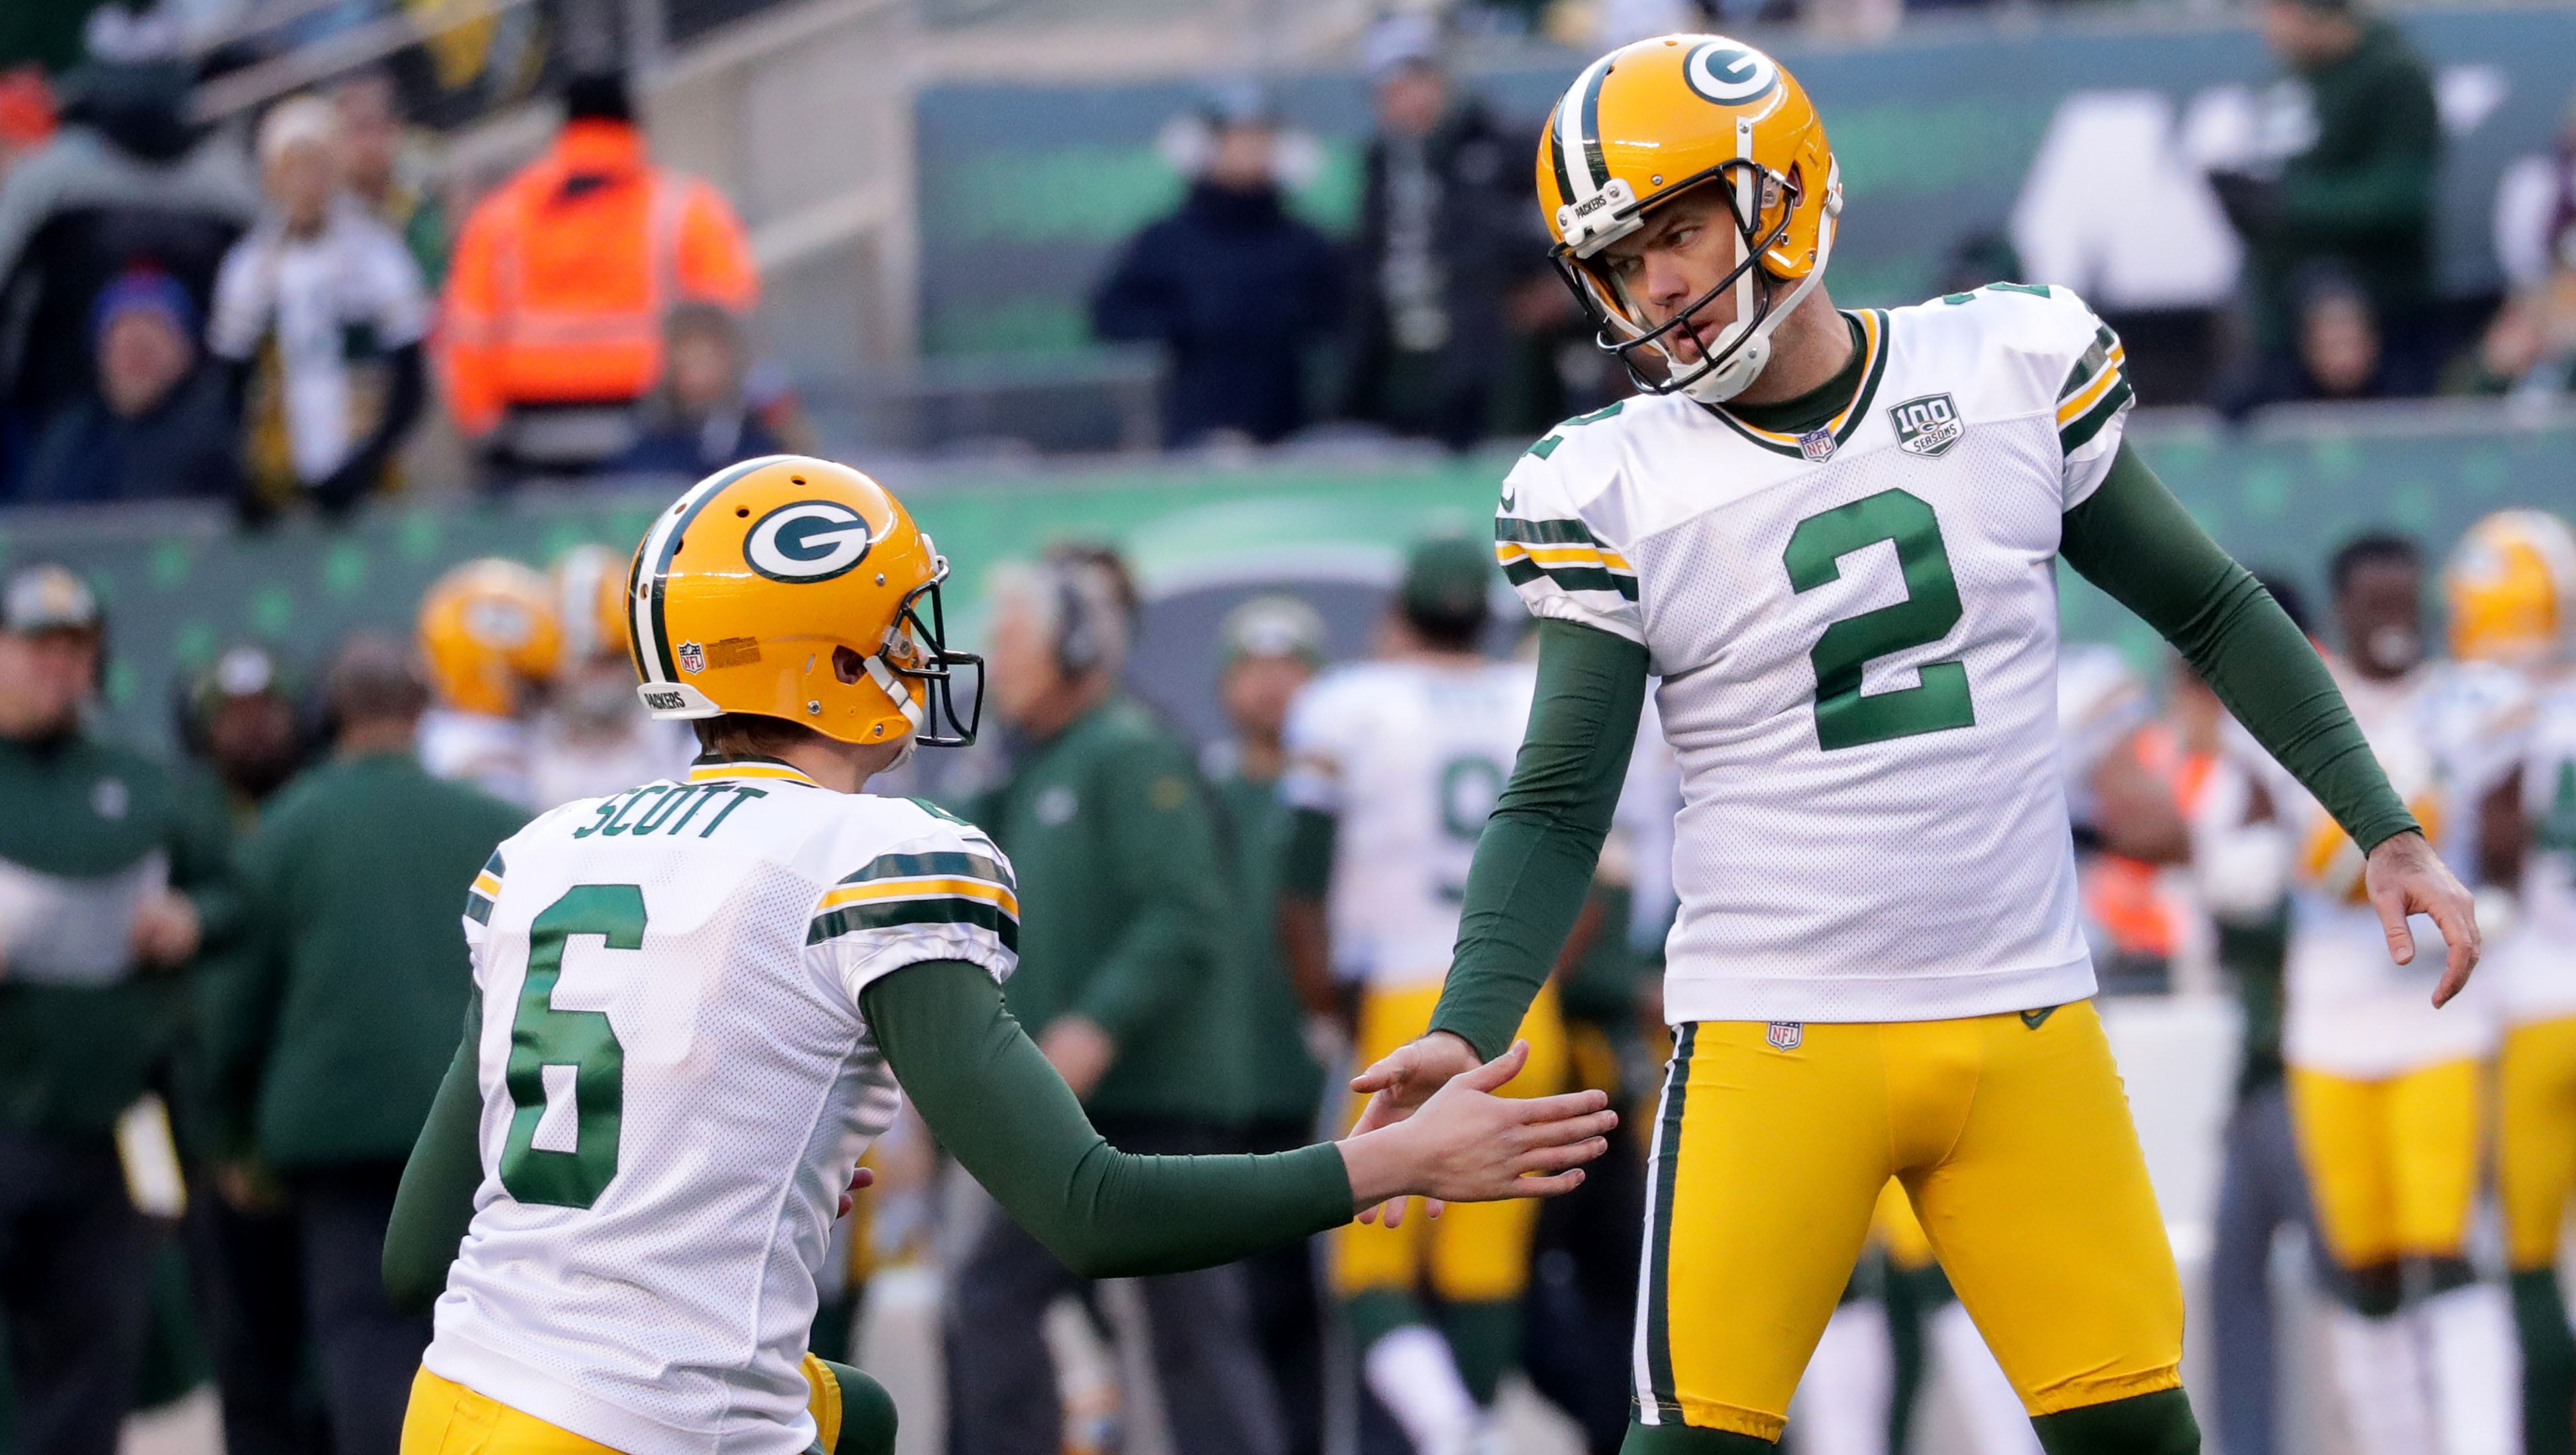 Green Bay Packers' Mason Crosby is congratulated by J.K. Scott for a field goal during the 2nd half of Packers 44-38 overtime win against the New York Jets at MetLife Stadium Sunday, Dec. 23, 2018, in East Rutherford. Photo by Mike De Sisti / The Milwaukee Journal Sentinel